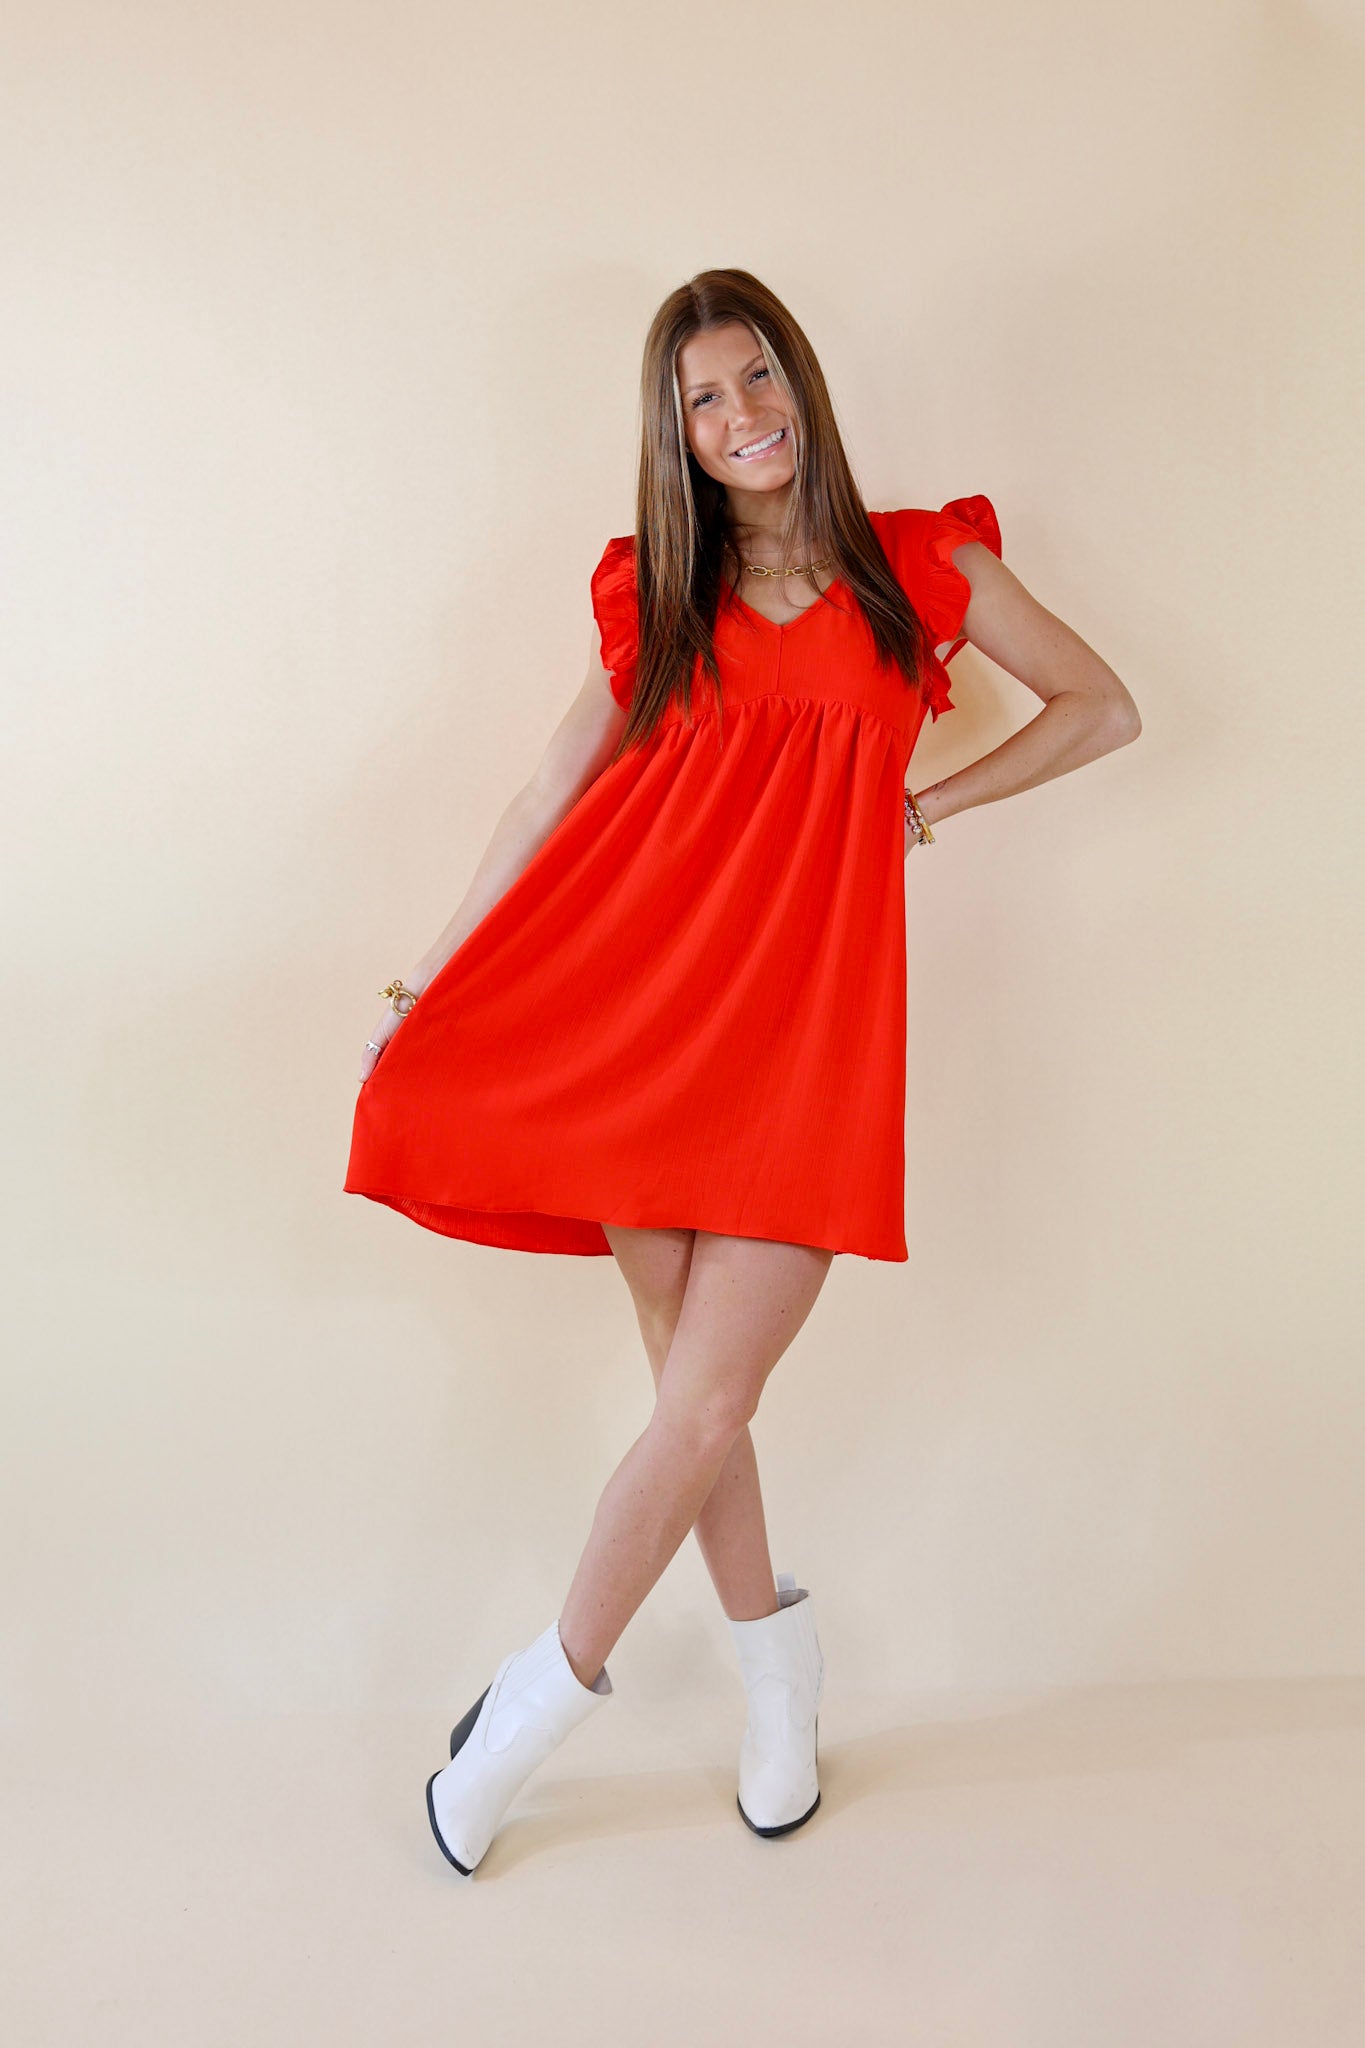 Capture Your Attention V Neck Dress with Ruffle Cap Sleeves in Red - Giddy Up Glamour Boutique